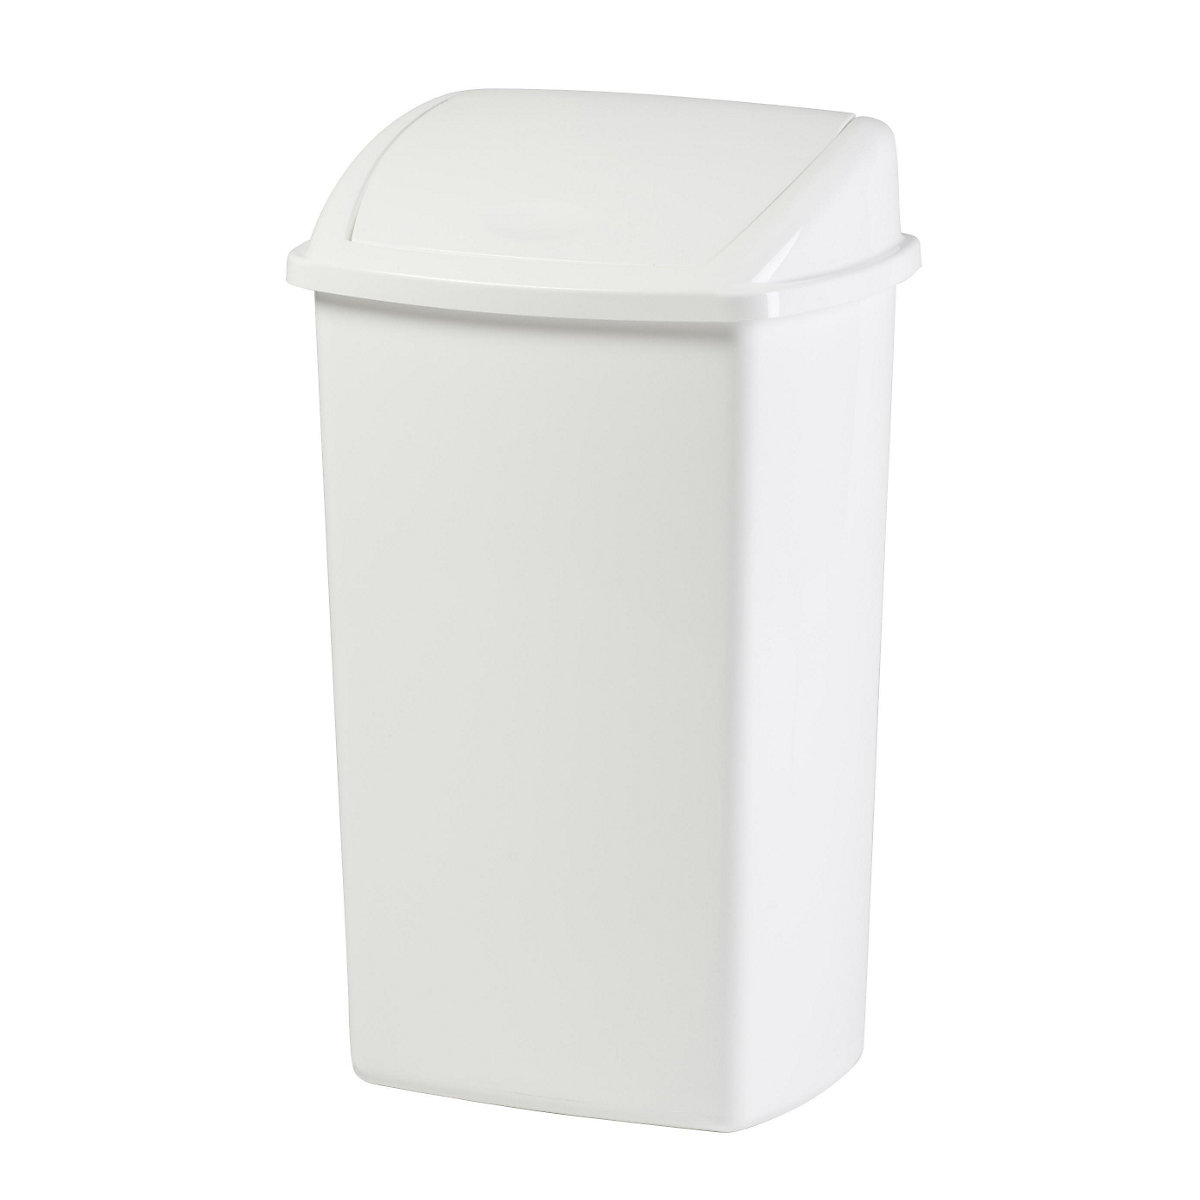 Waste collector with swing lid, capacity 50 l, WxHxD 310 x 680 x 400 mm, white, 3+ items-1